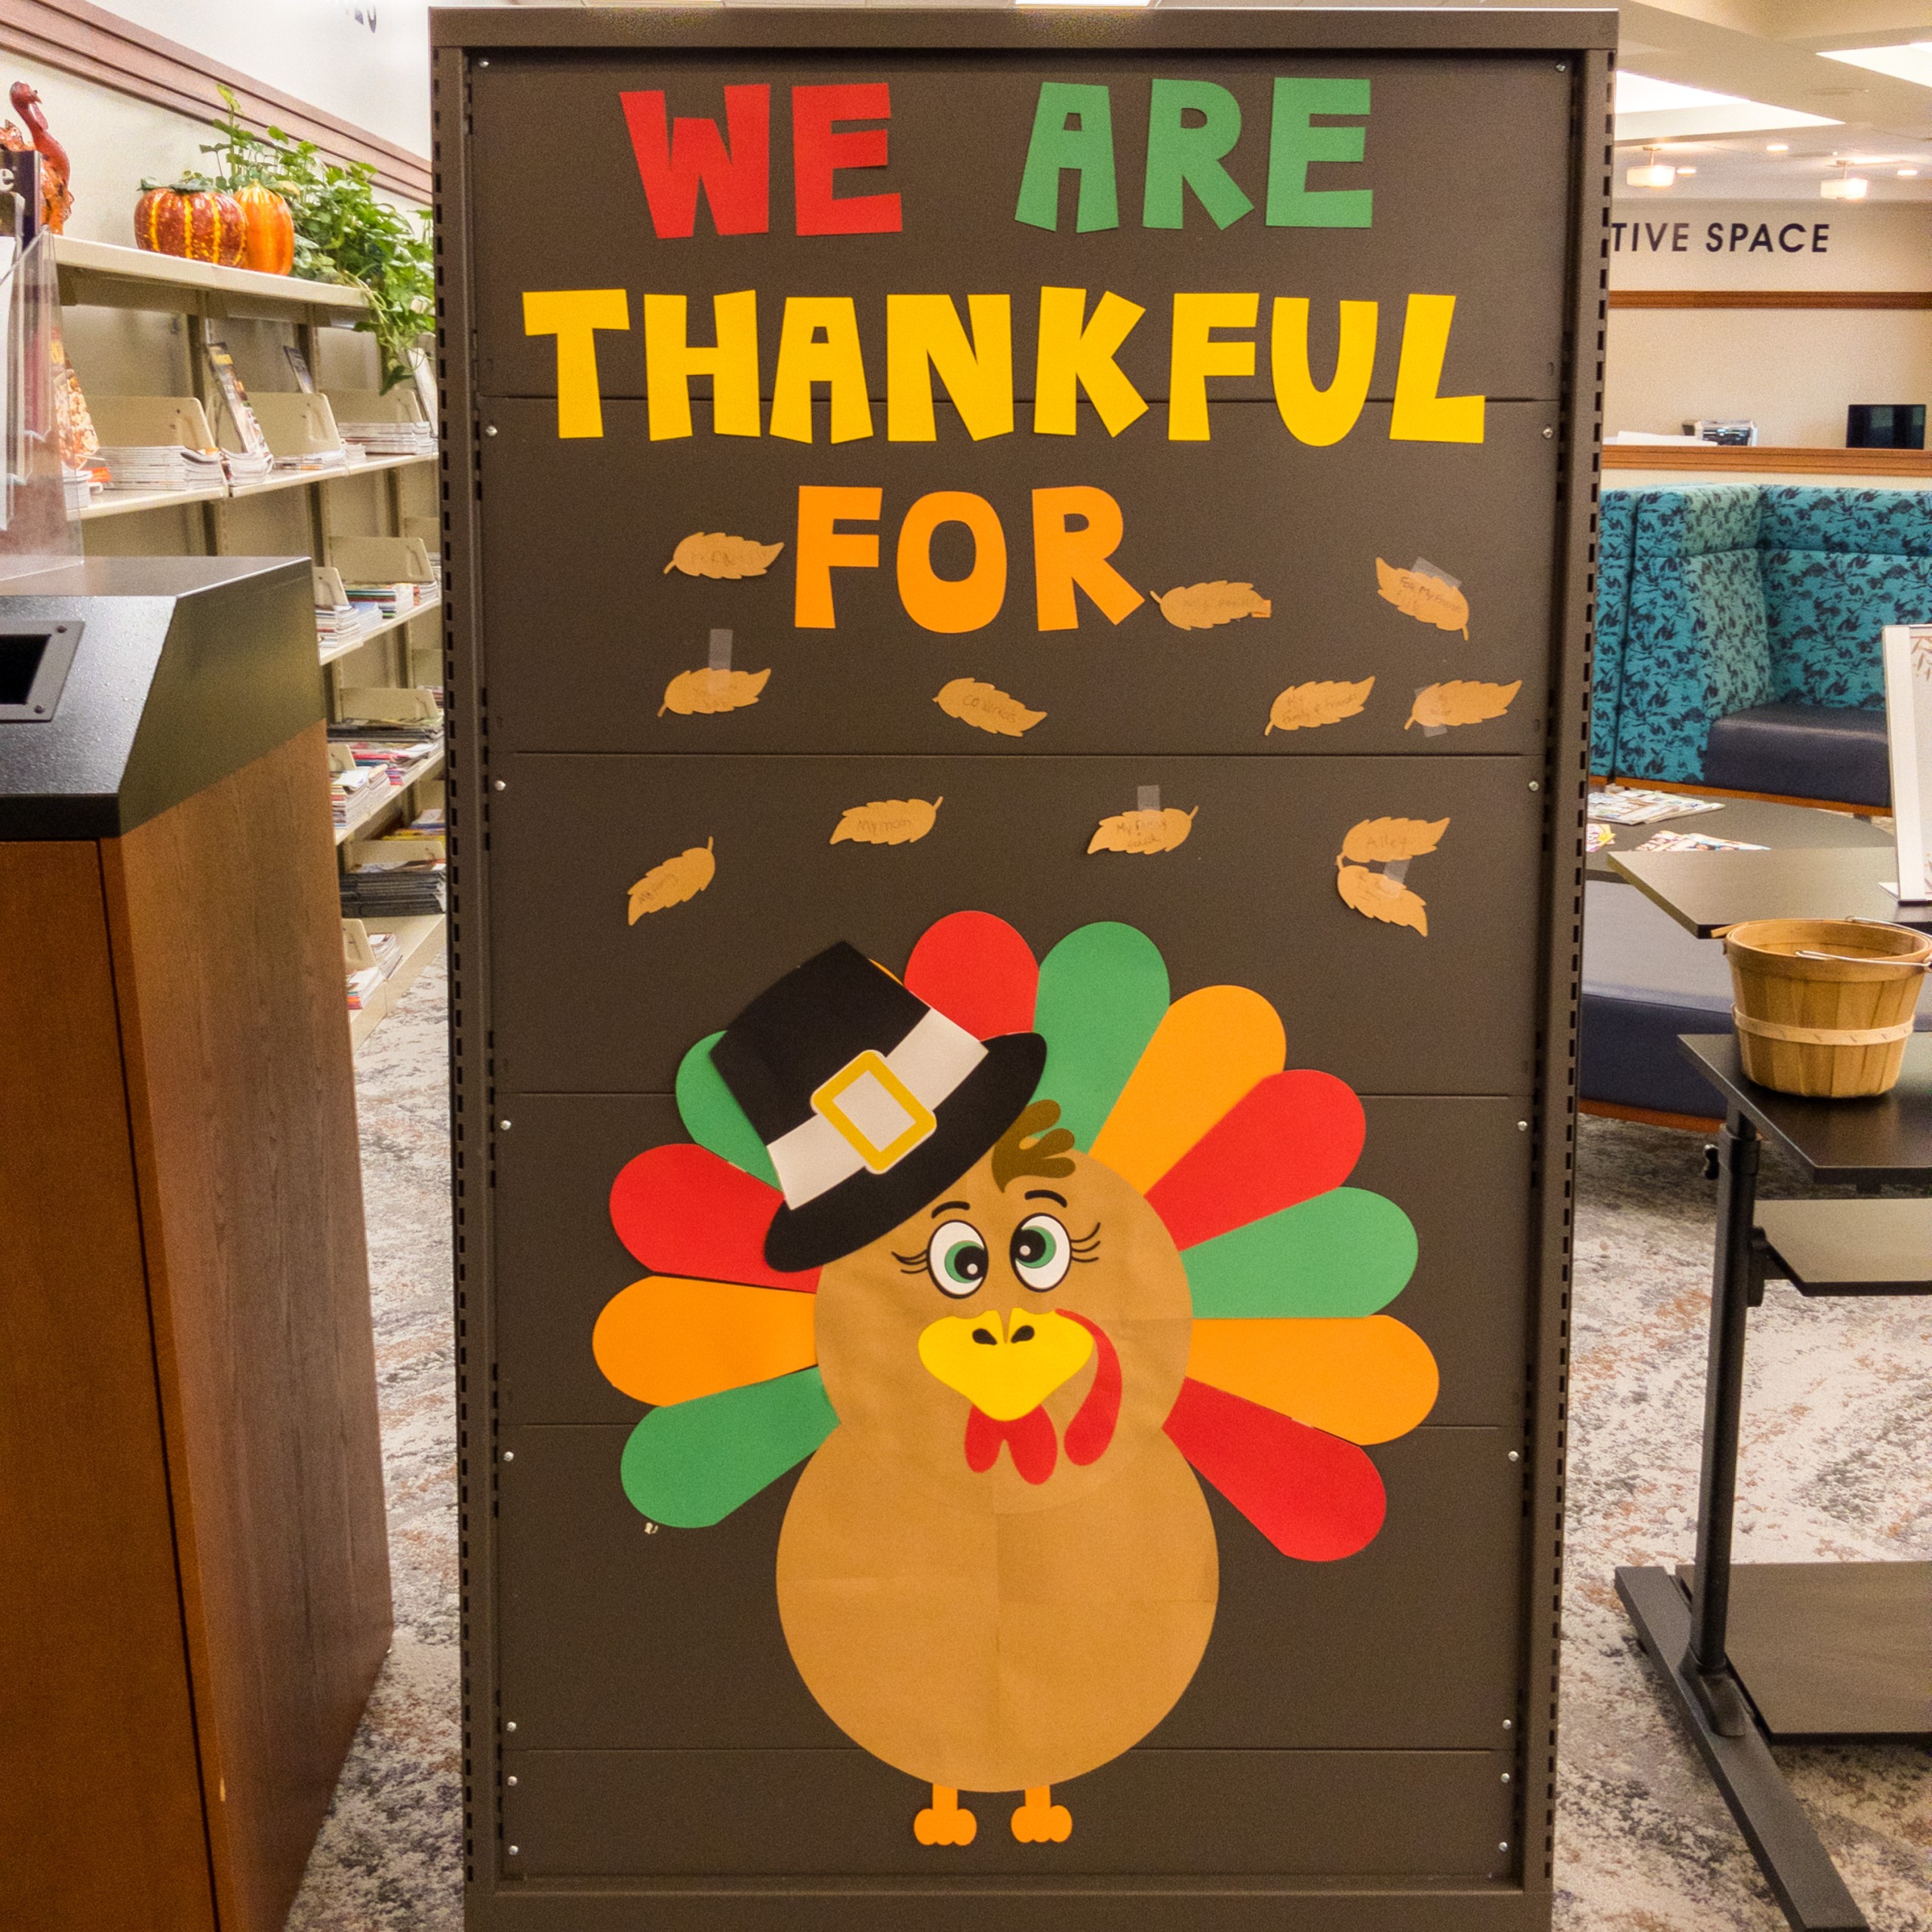 Picture of thankful board